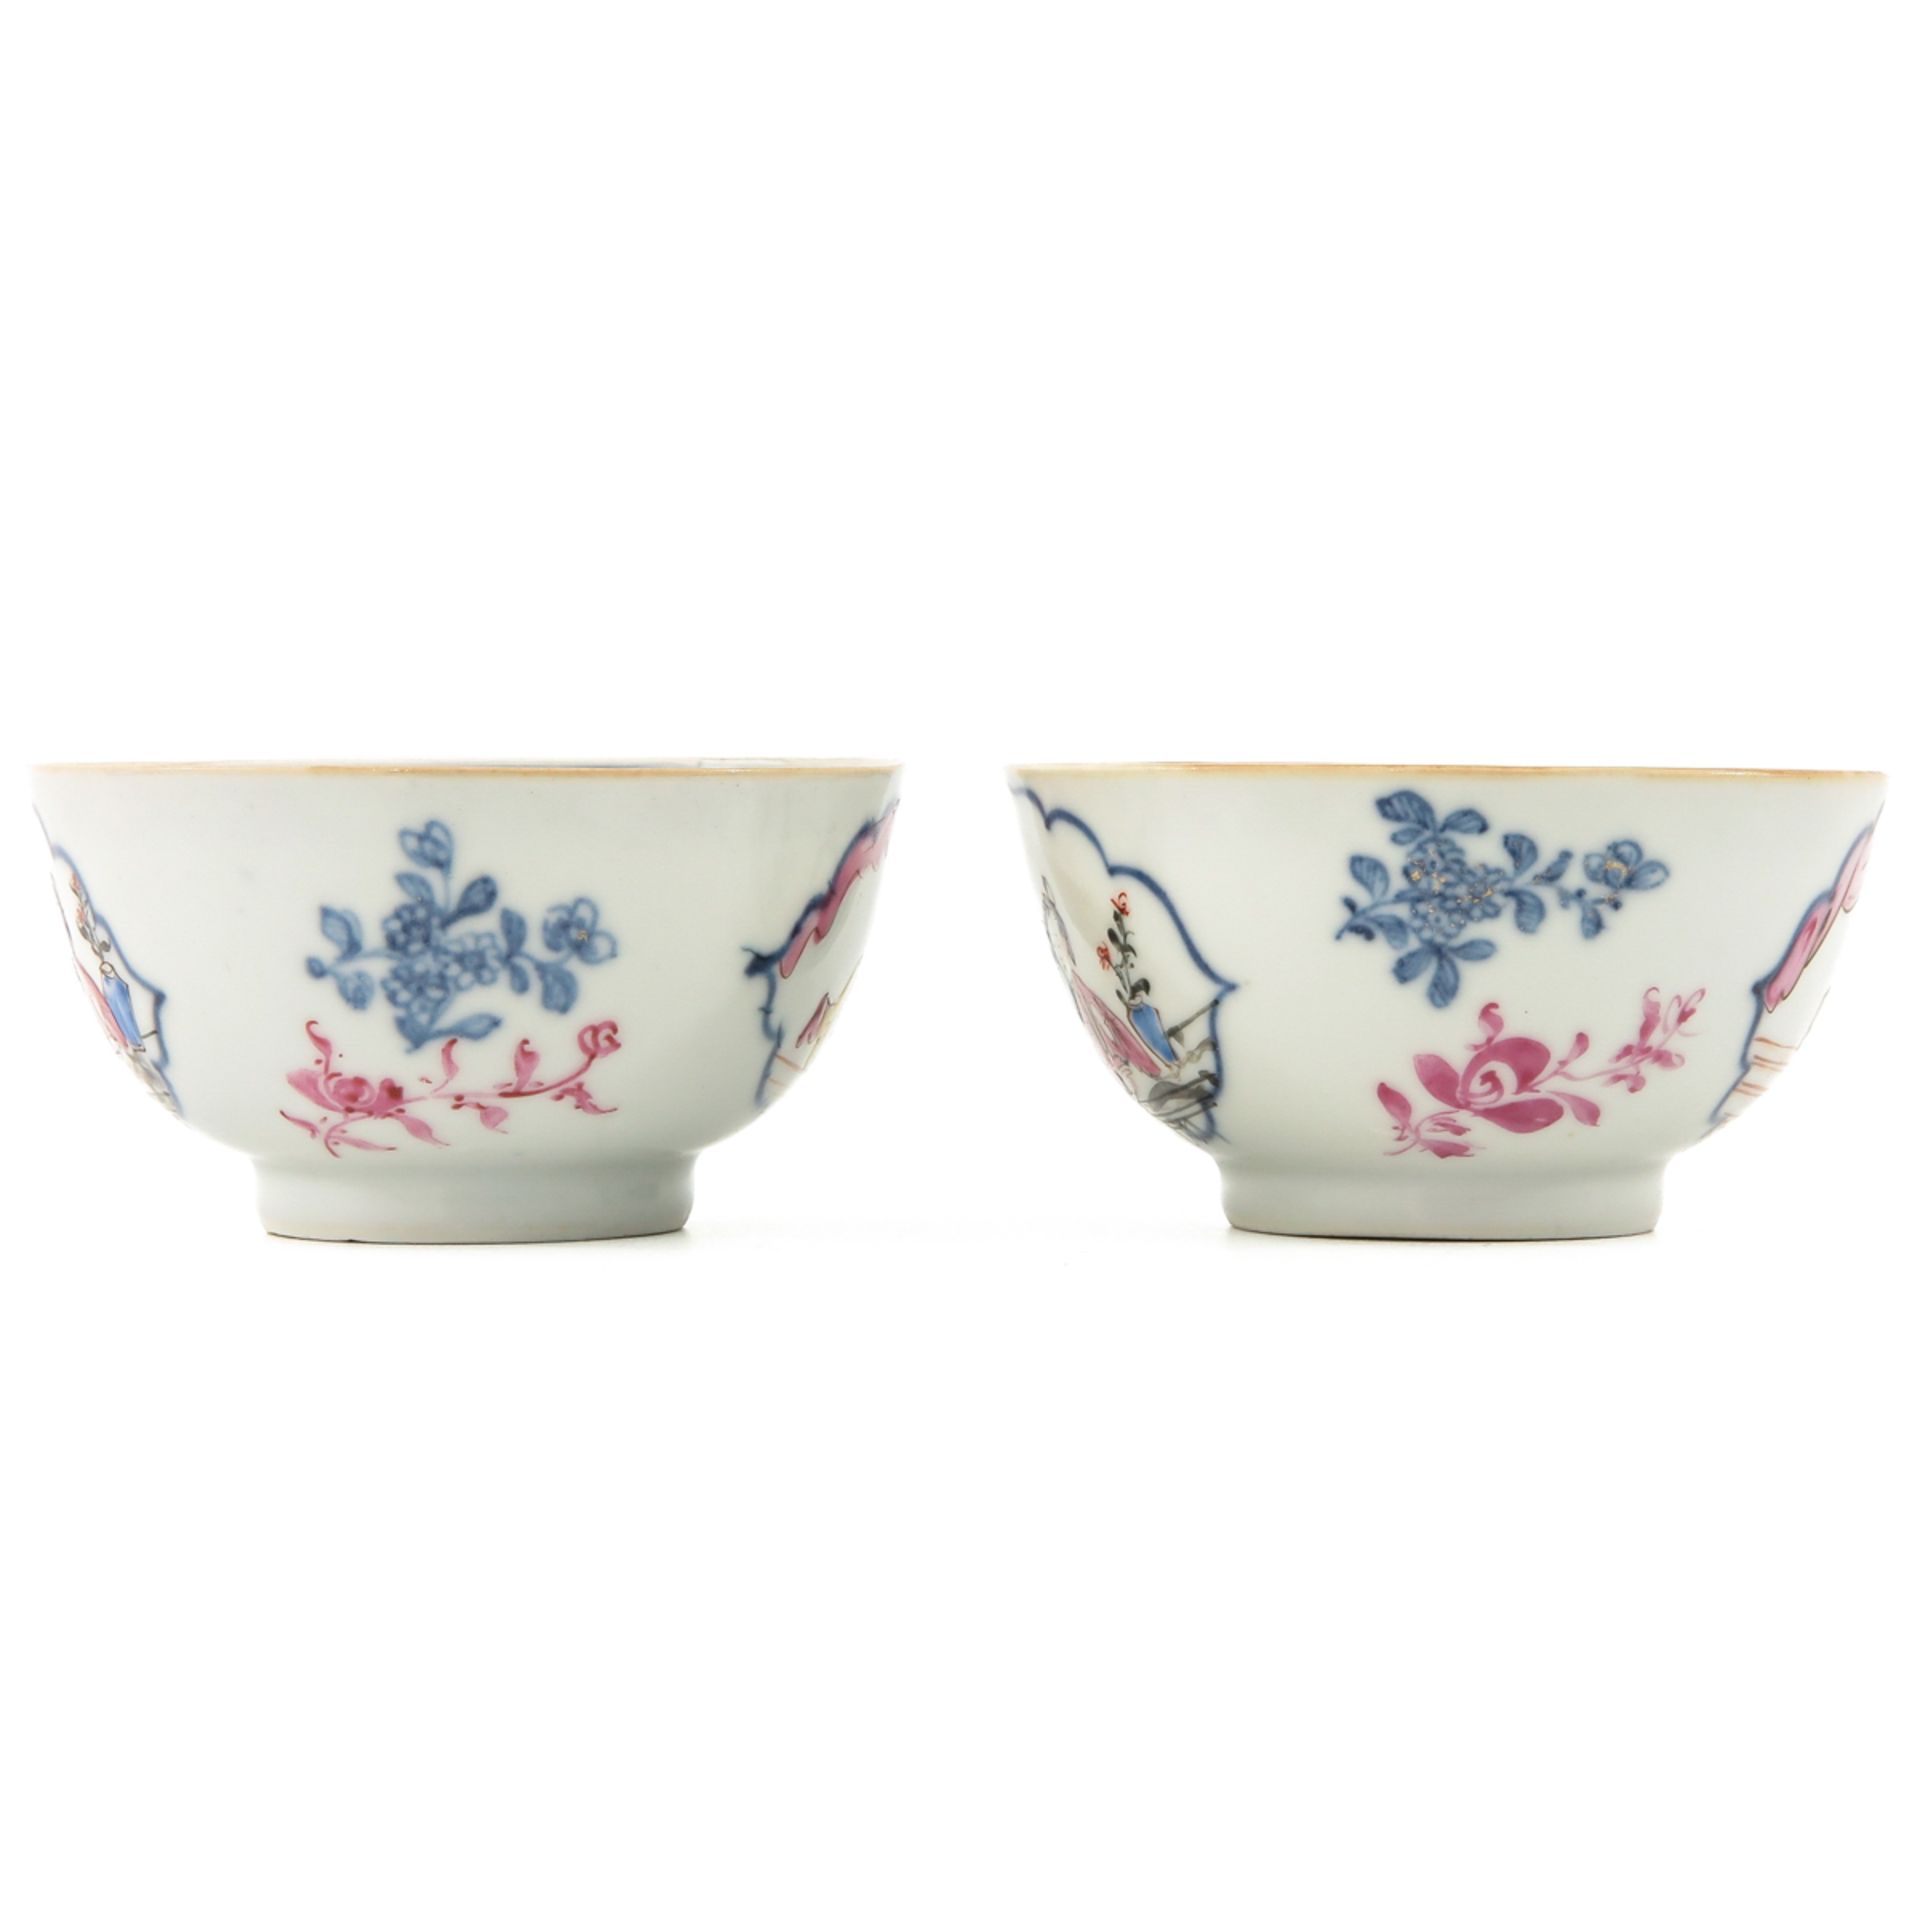 A Lot of 2 Famille Rose Cups and Saucers - Image 2 of 10